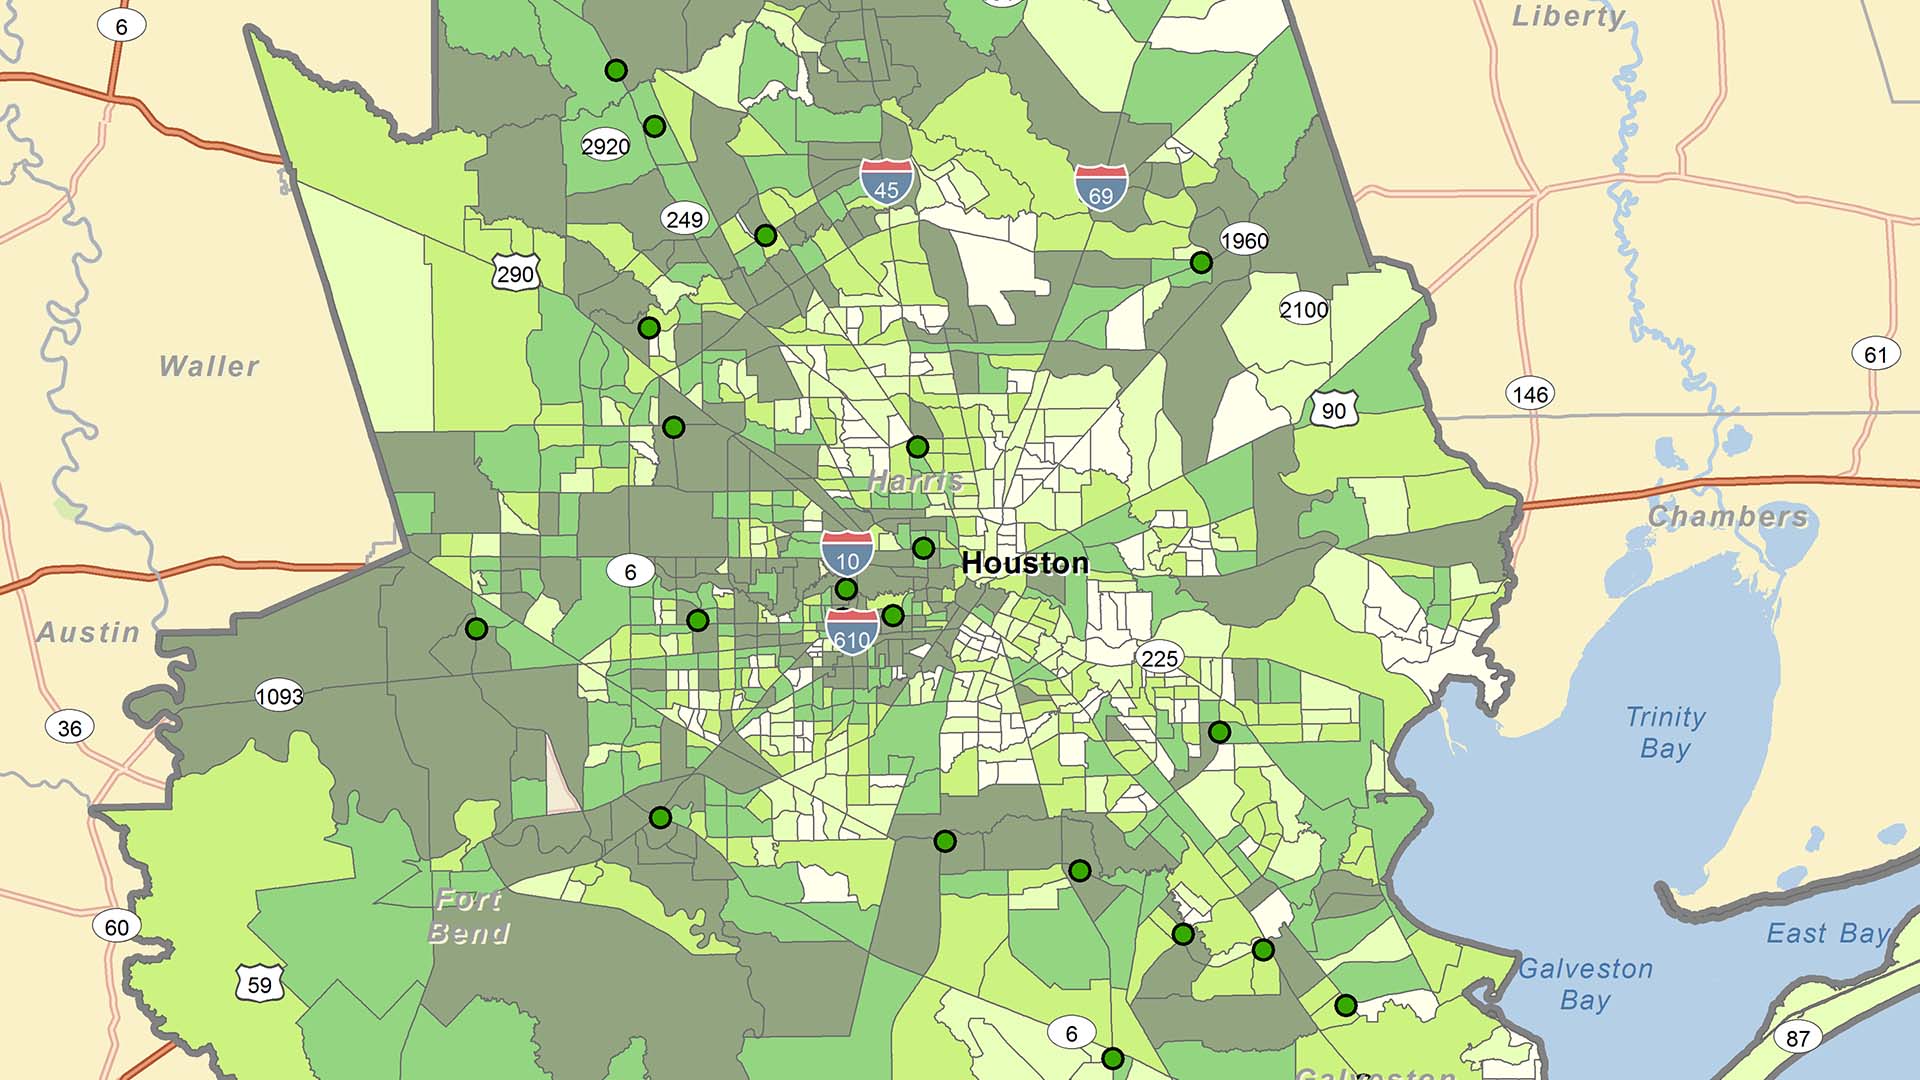 A map showing lending inside the Houston Assessment Area by Regions Bank\'s Peer Banks